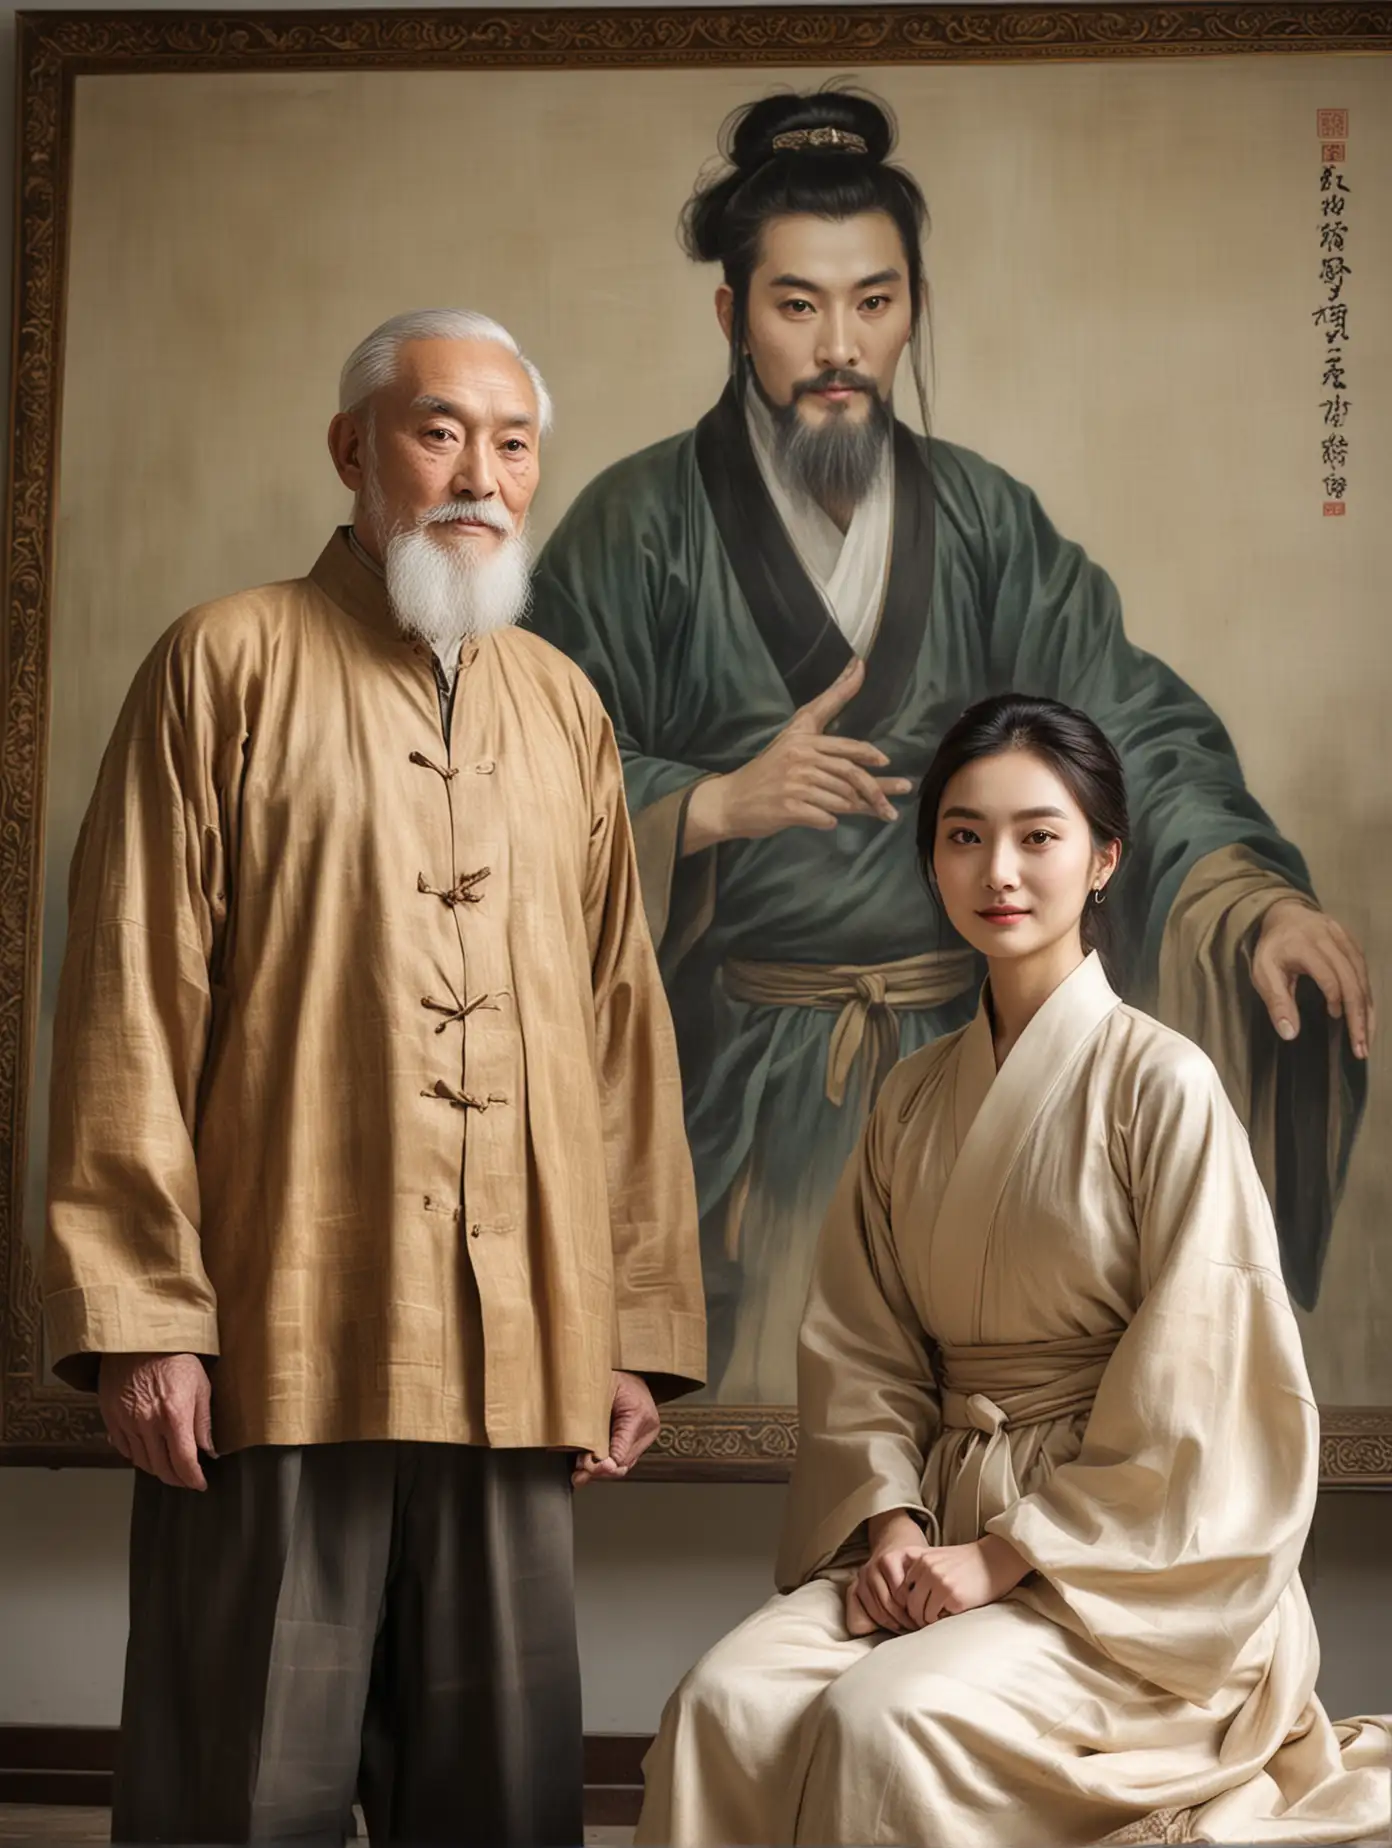 Ancient Man 86 year old and Jing tian  36 year old huge, in a painting Room 